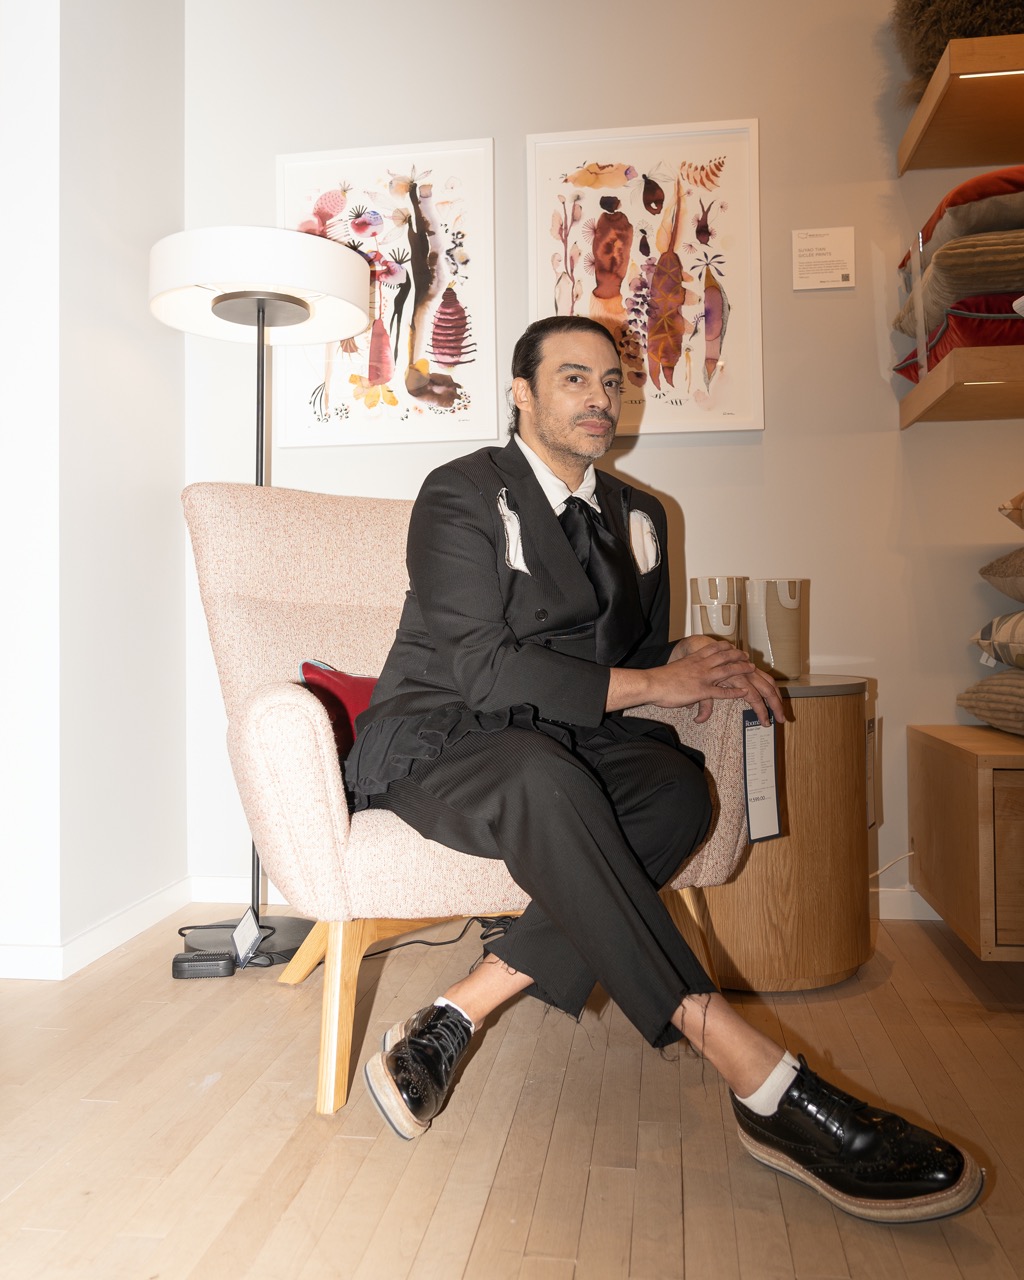 A photograph of Victor, the designer of the collection, sitting in a chair and looking into the camera. He is wearing a black suit and black shoes.